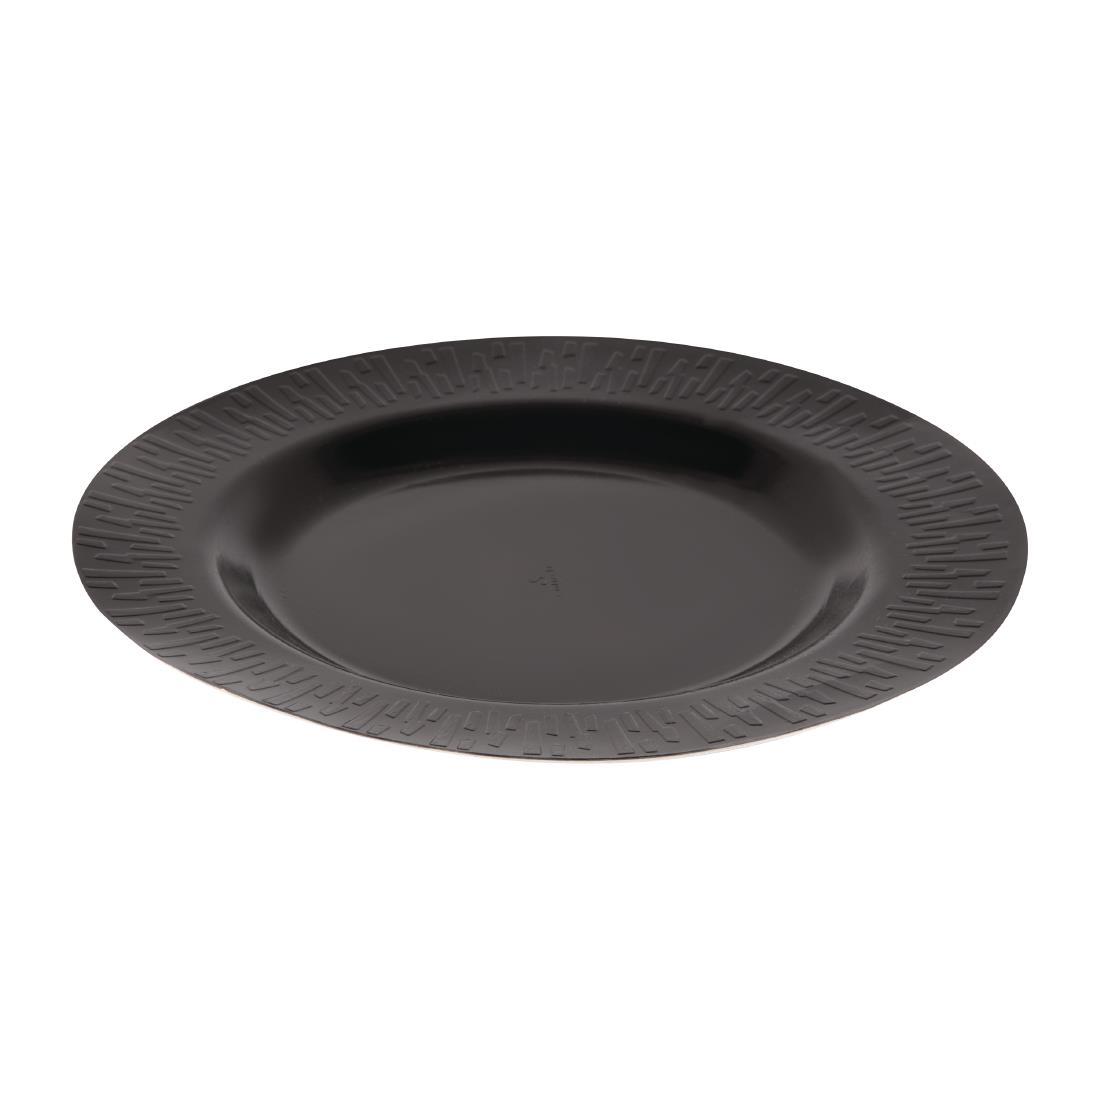 Solia Bagasse Plates Black 270mm (Pack of 50) - FC784  - 1